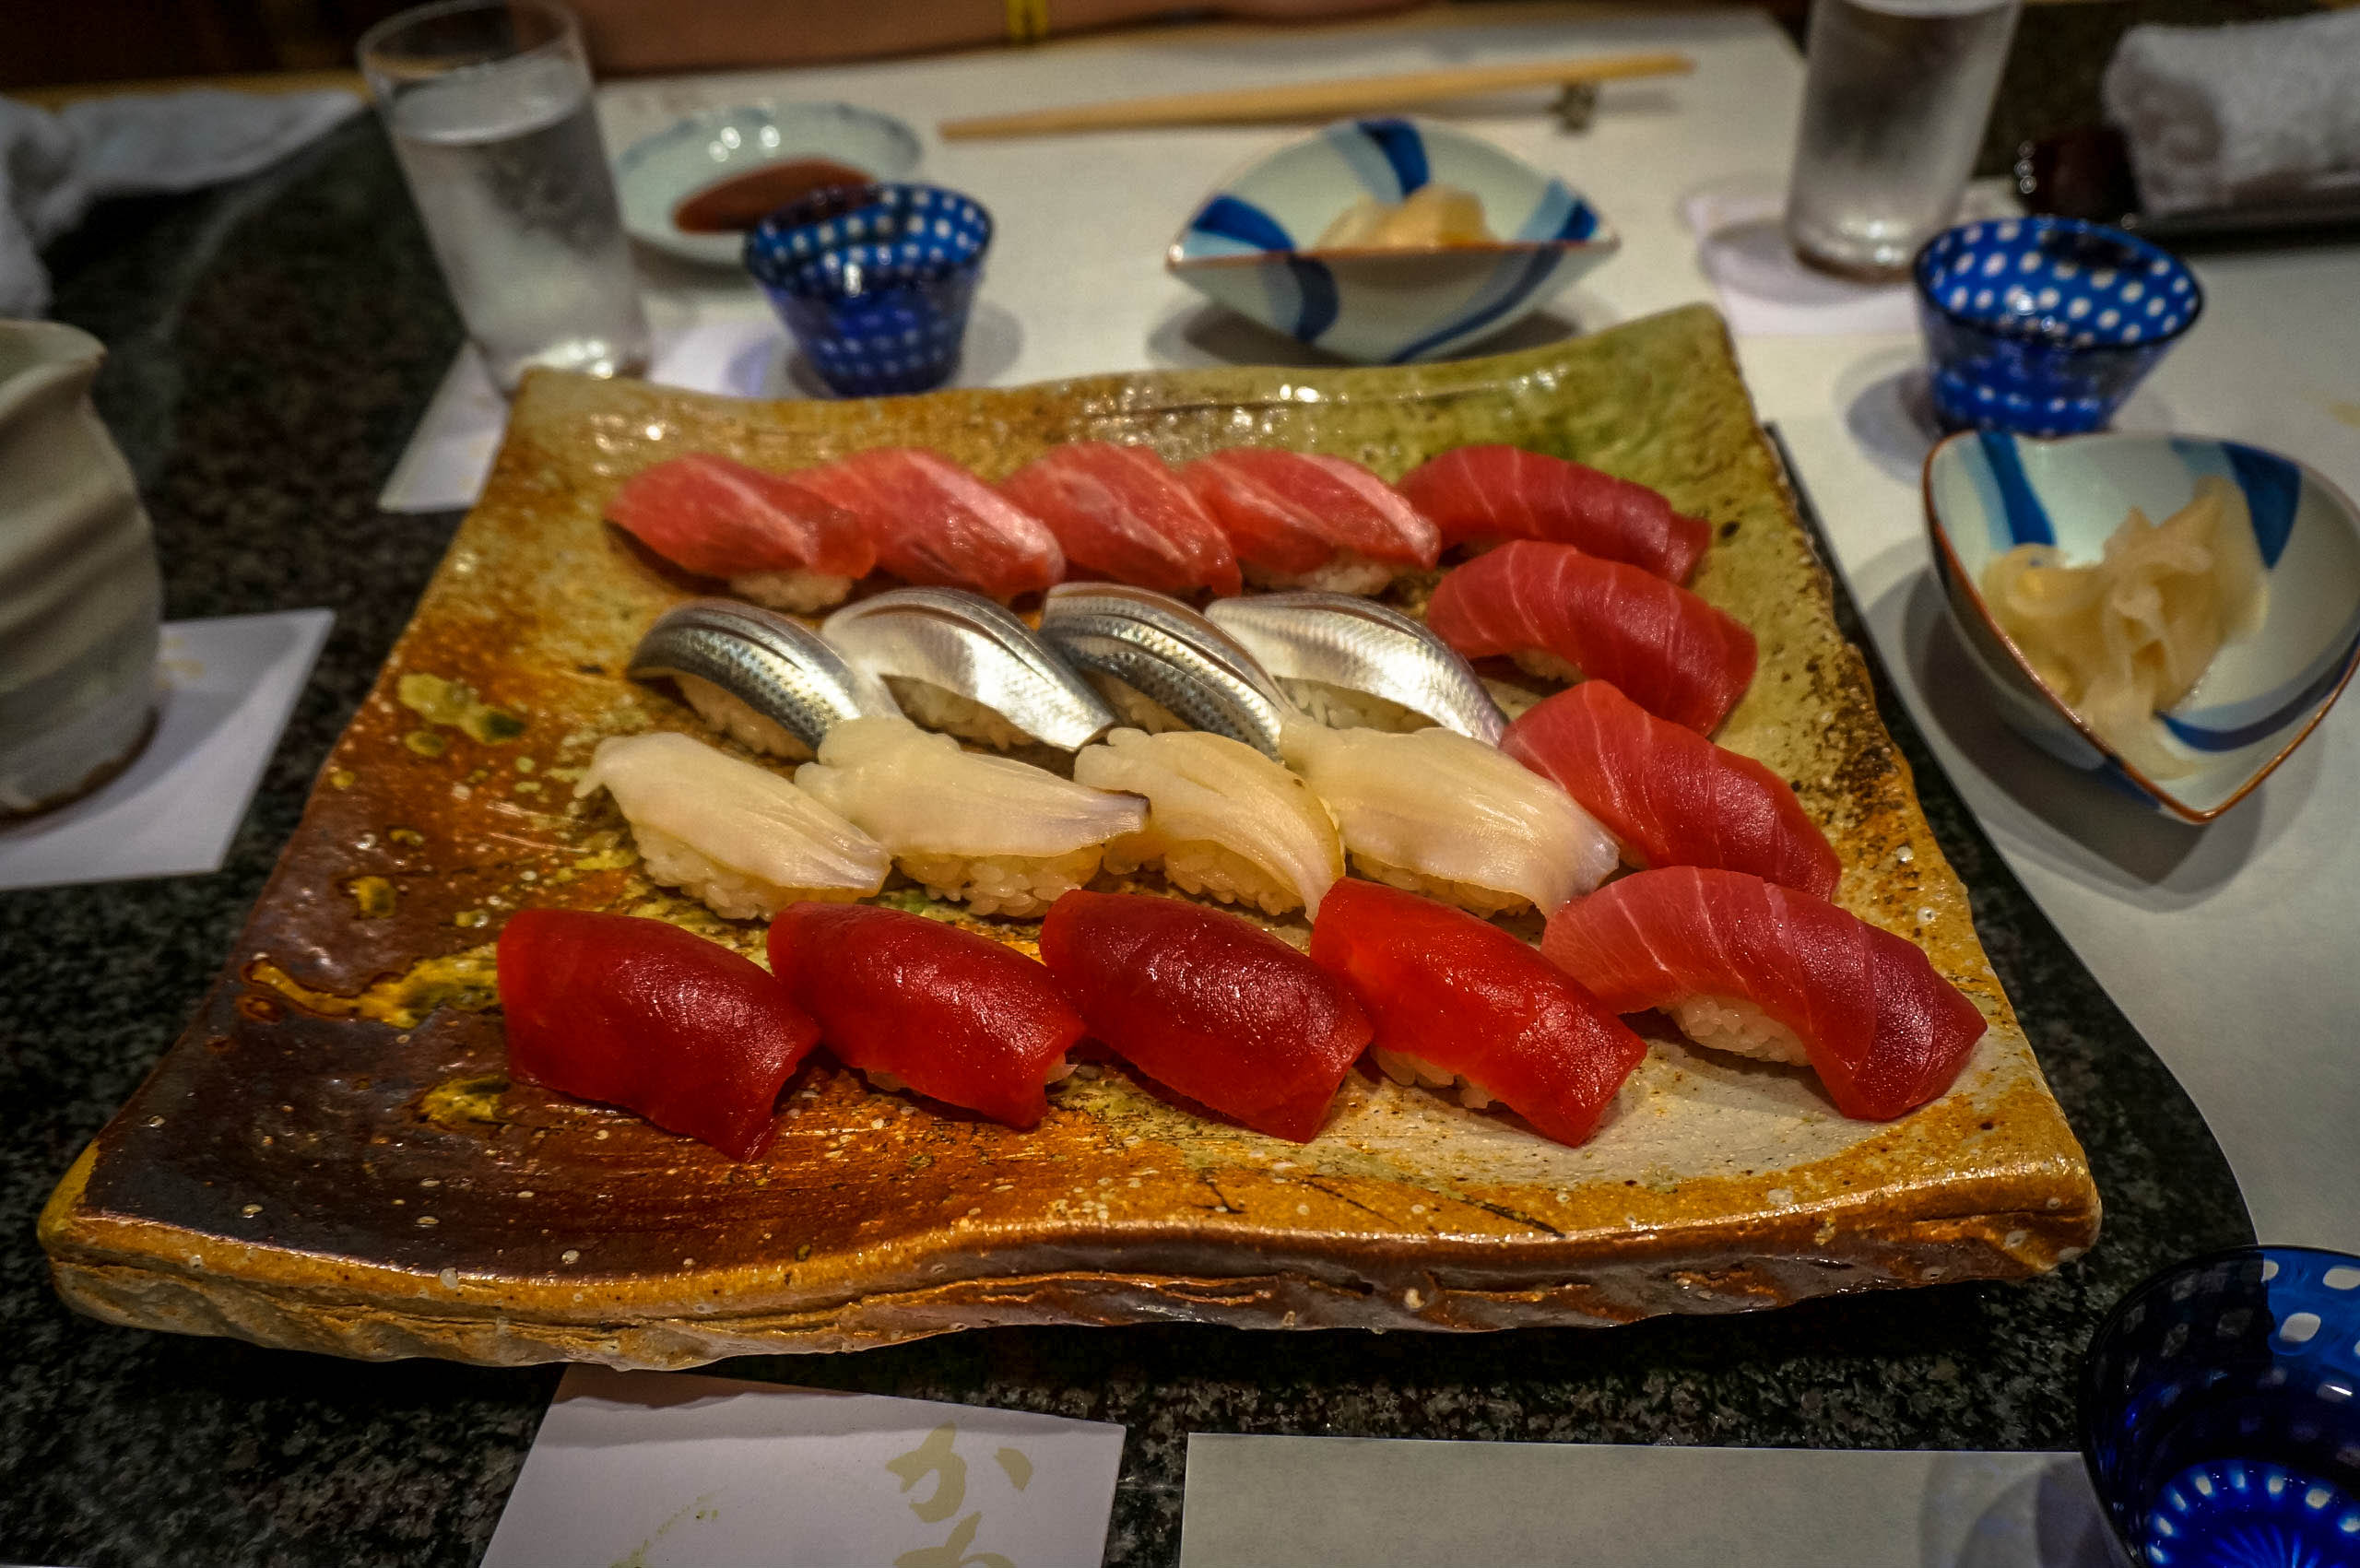 Varying levels of fatty Tuna, or Toro, and other fish